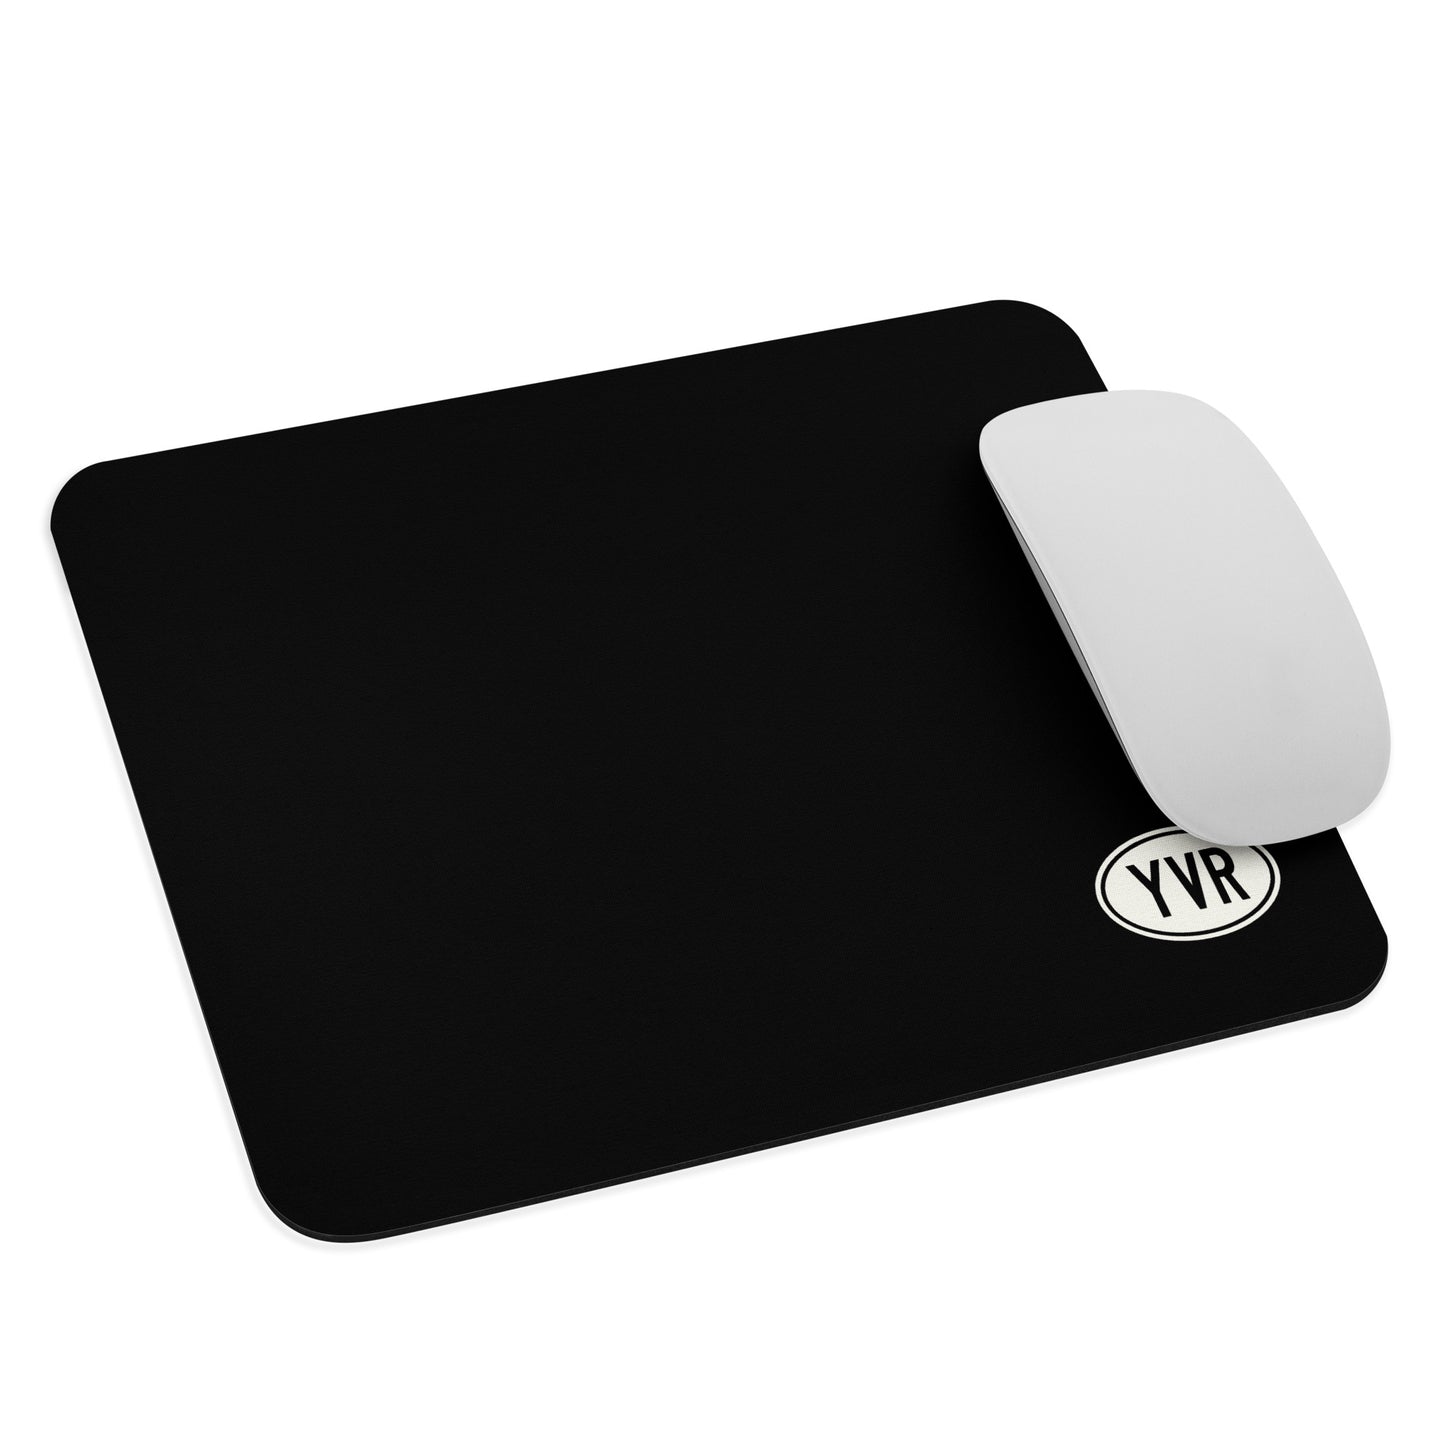 Unique Travel Gift Mouse Pad - White Oval • YVR Vancouver • YHM Designs - Image 03